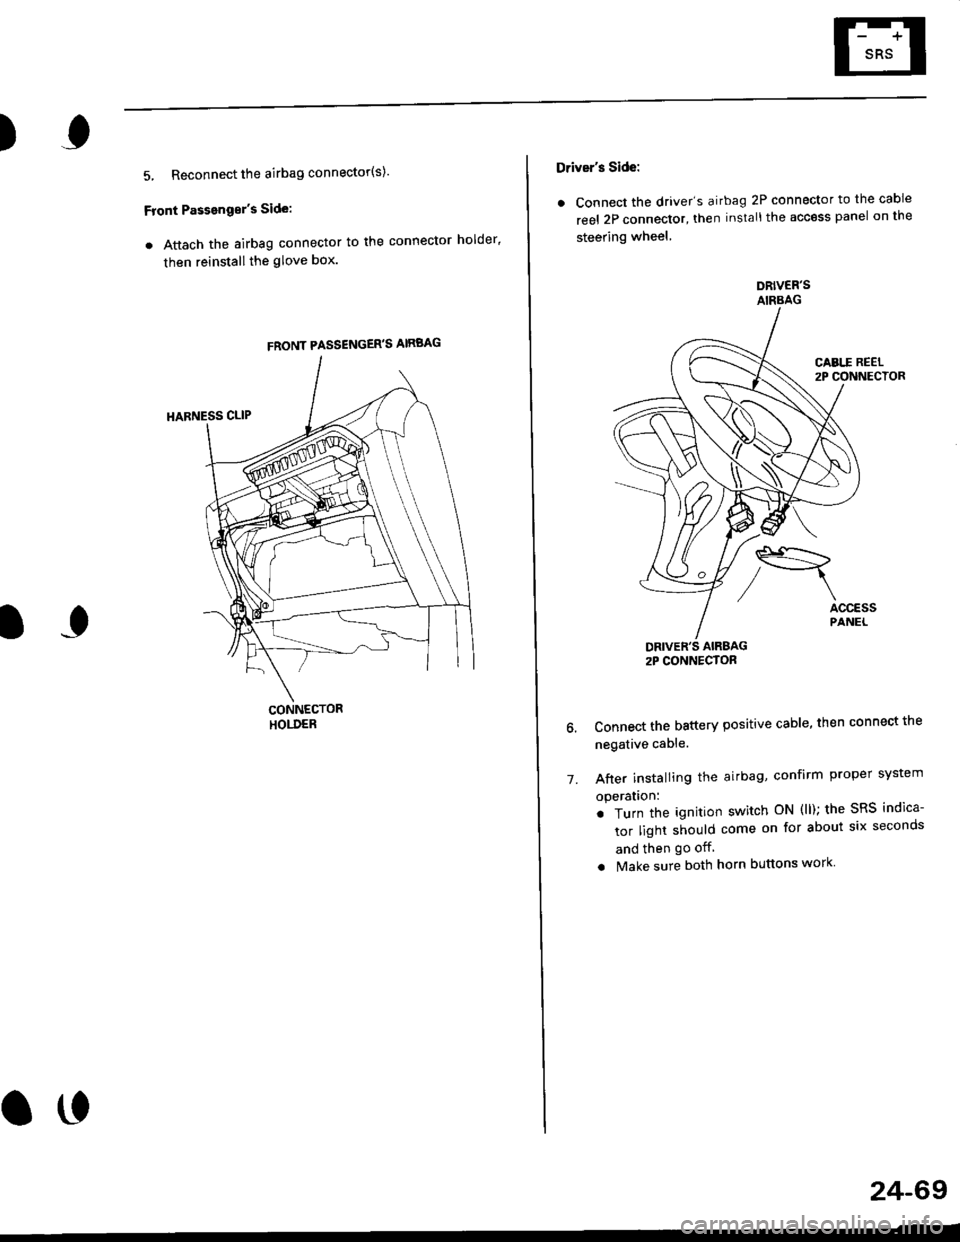 HONDA CIVIC 1997 6.G Service Manual )
5, Reconnect the airbag connector(s)
Front Passengors Side:
a Attach the airbag connector to the connector holder
then reinstallthe glove box.
FRONT PASSENGERS AIRBAG
oo
24-69
Drivers Side:
a C